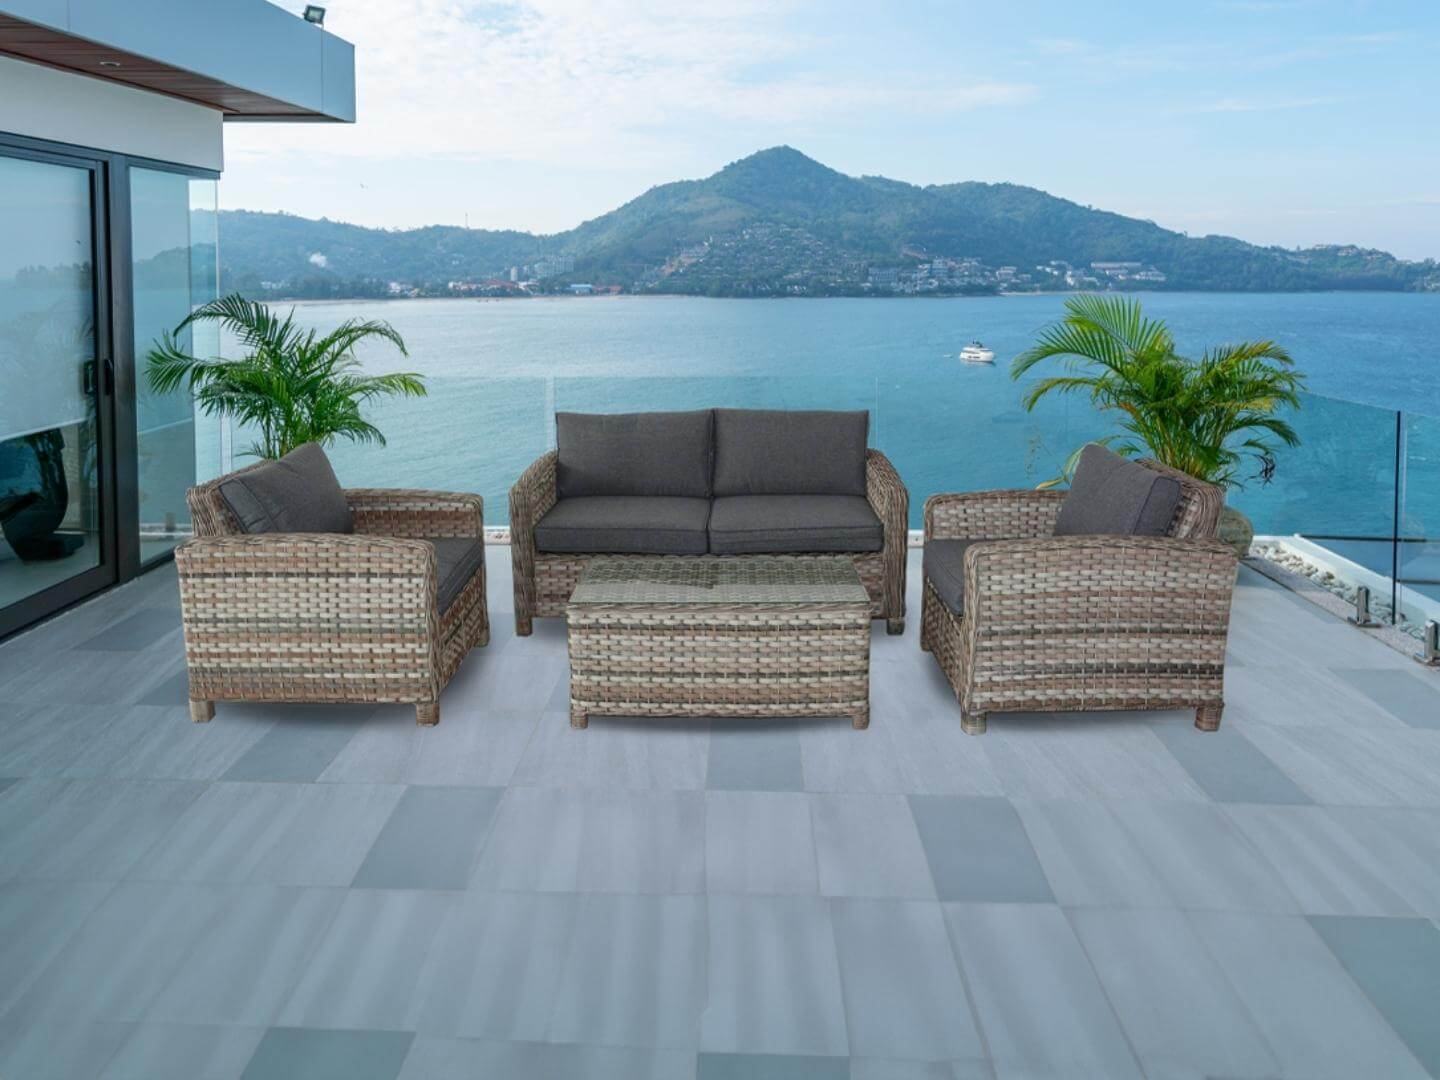 RODOS outdoor seating set - Lux Furniture